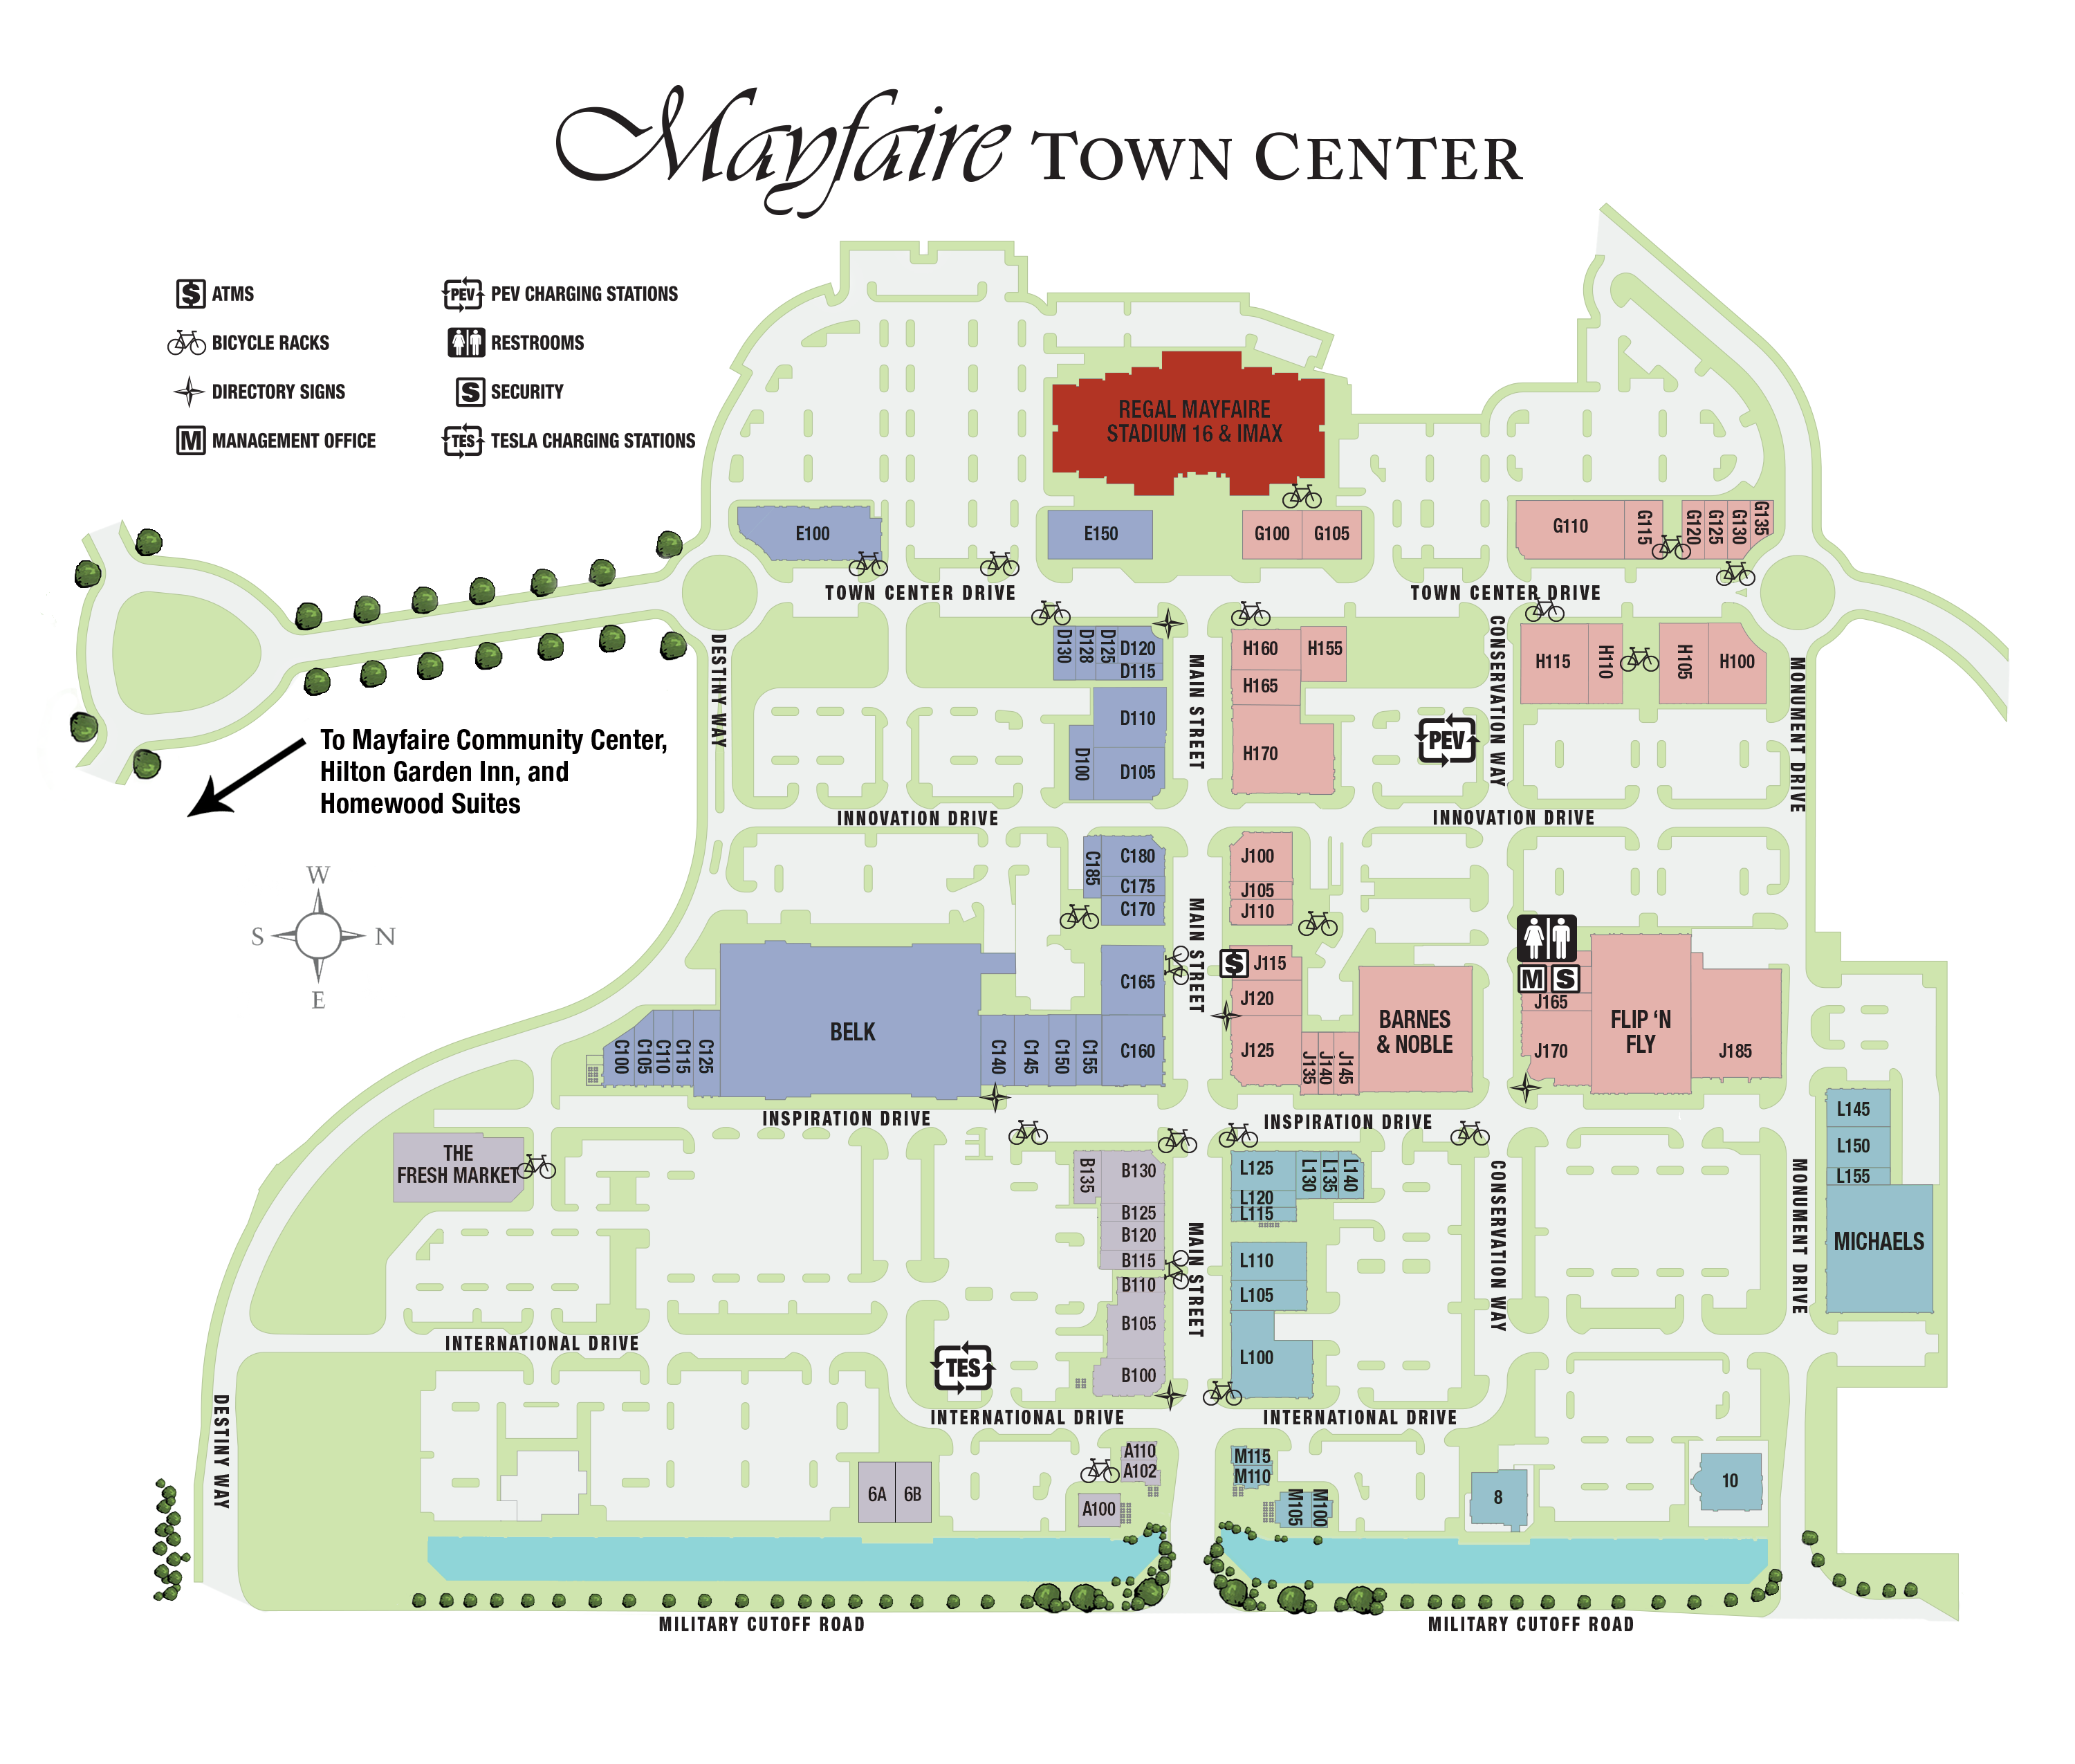 Mayfaire Town Center directory map